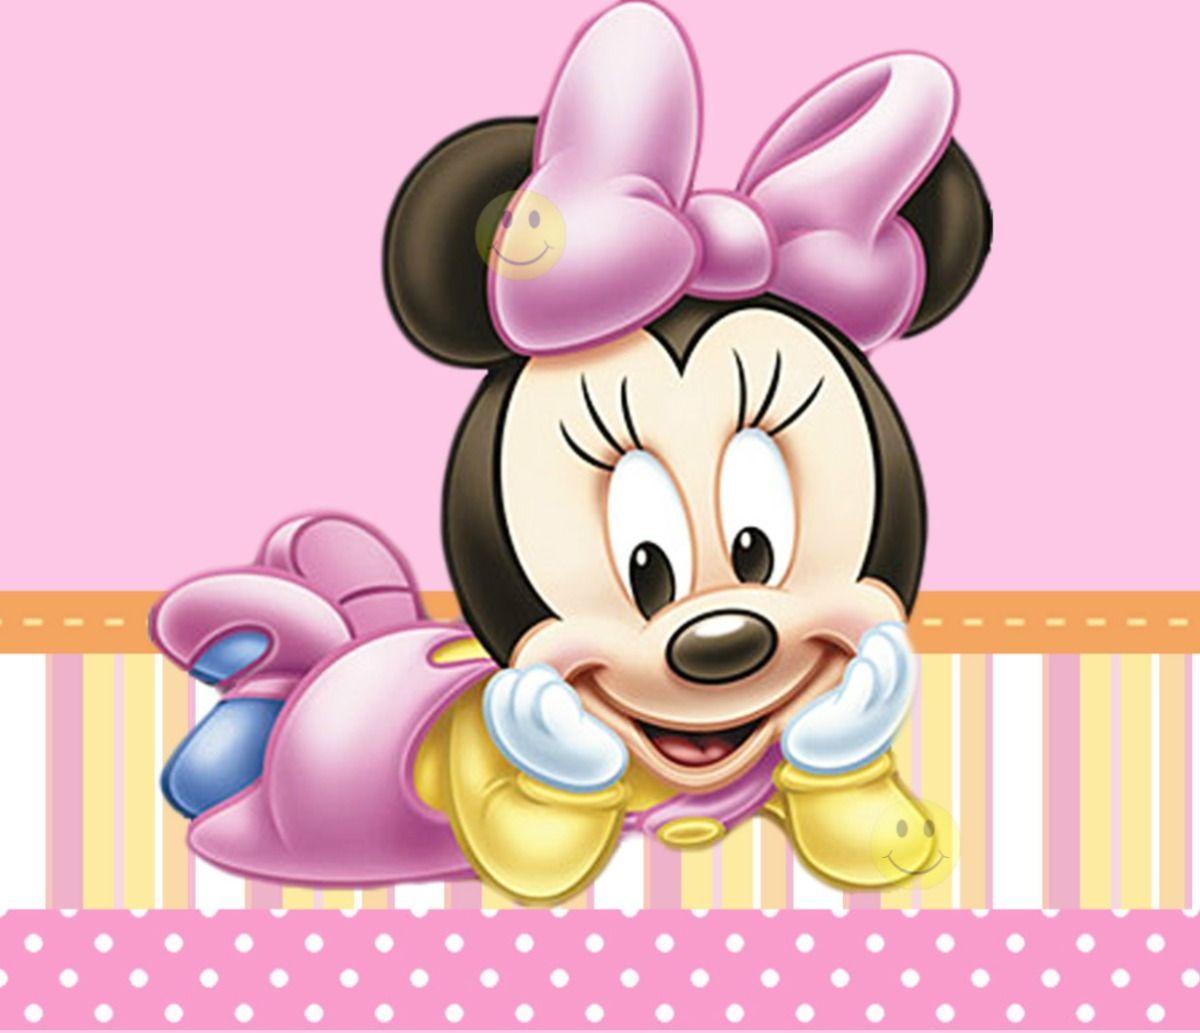 30 Mickey Mouse Disney Aesthetic Wallpapers  Minnie Mouse  Idea Wallpapers   iPhone WallpapersColor Schemes